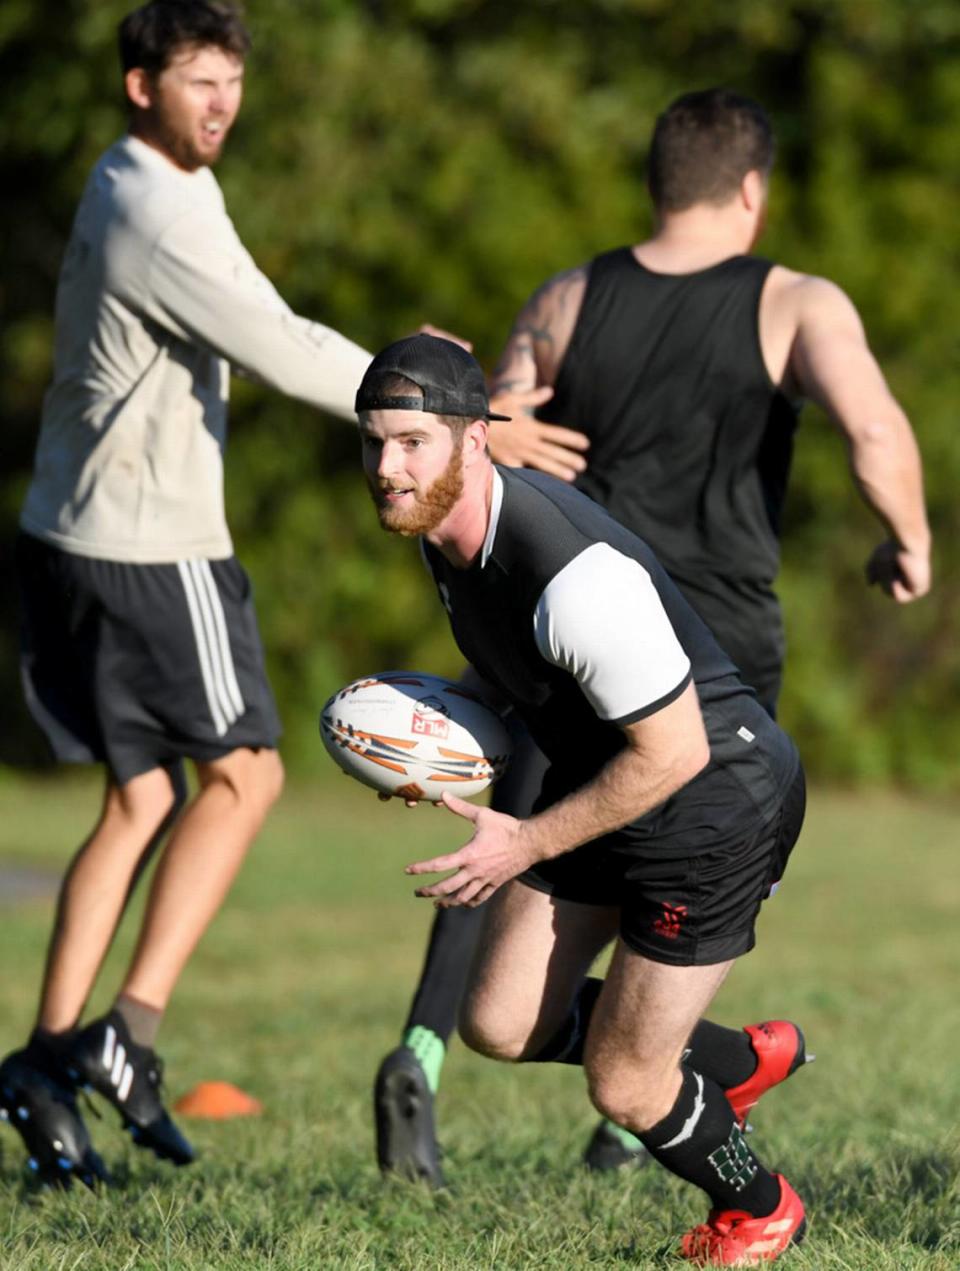 Rugby club organizer and celebrated player on both U.S. and European squads, Alex MacDonald is taking up the rugby mantle from clubs of the past on Hilton Head. The club was last active in 2017 but MacDonald hopes to rekindle the rugby spark in 2023.